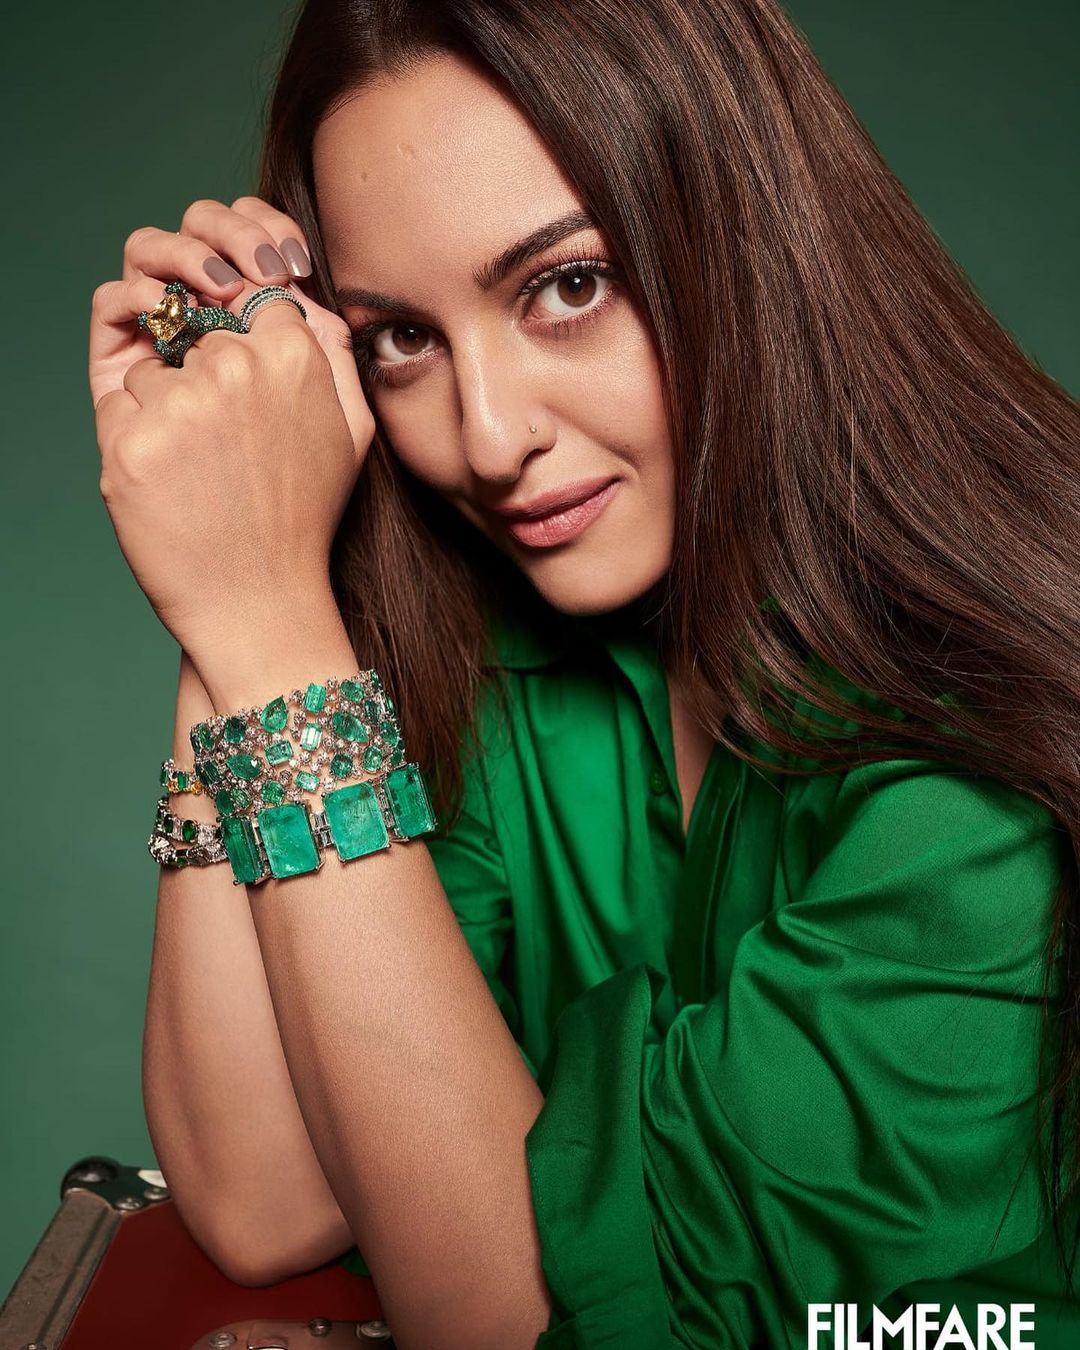 Sonakshi Sinha looks chic in the green outfit and bracelet.